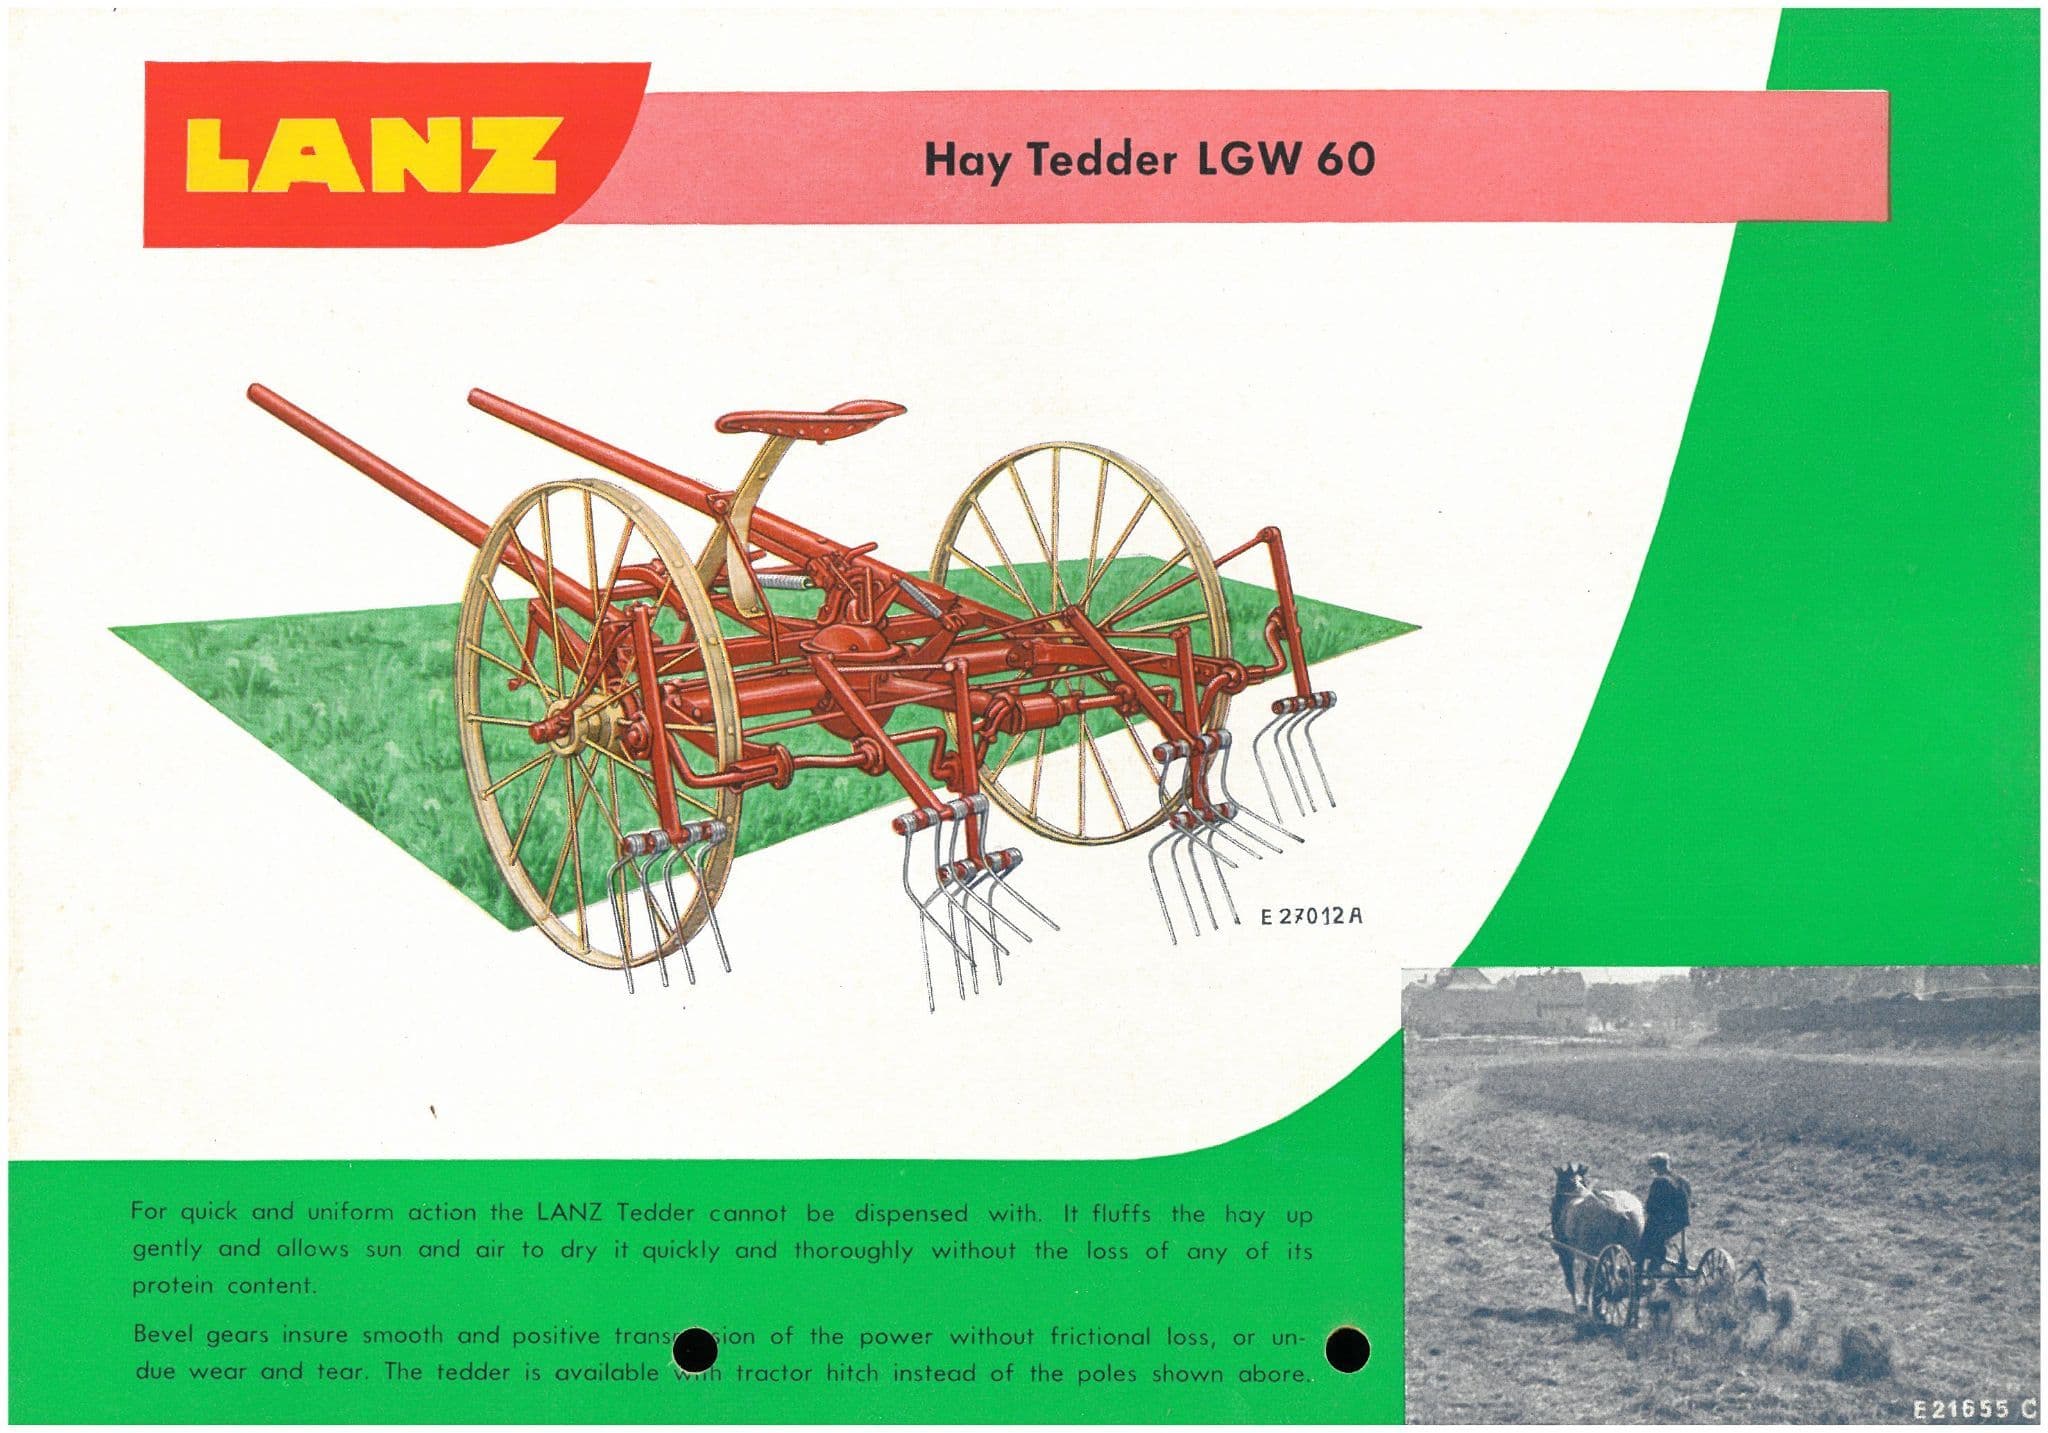 lanz-alldog-tractor-brochure-also-shows-34-of-the-90-possible-implements-[12]-39351-p.jpg